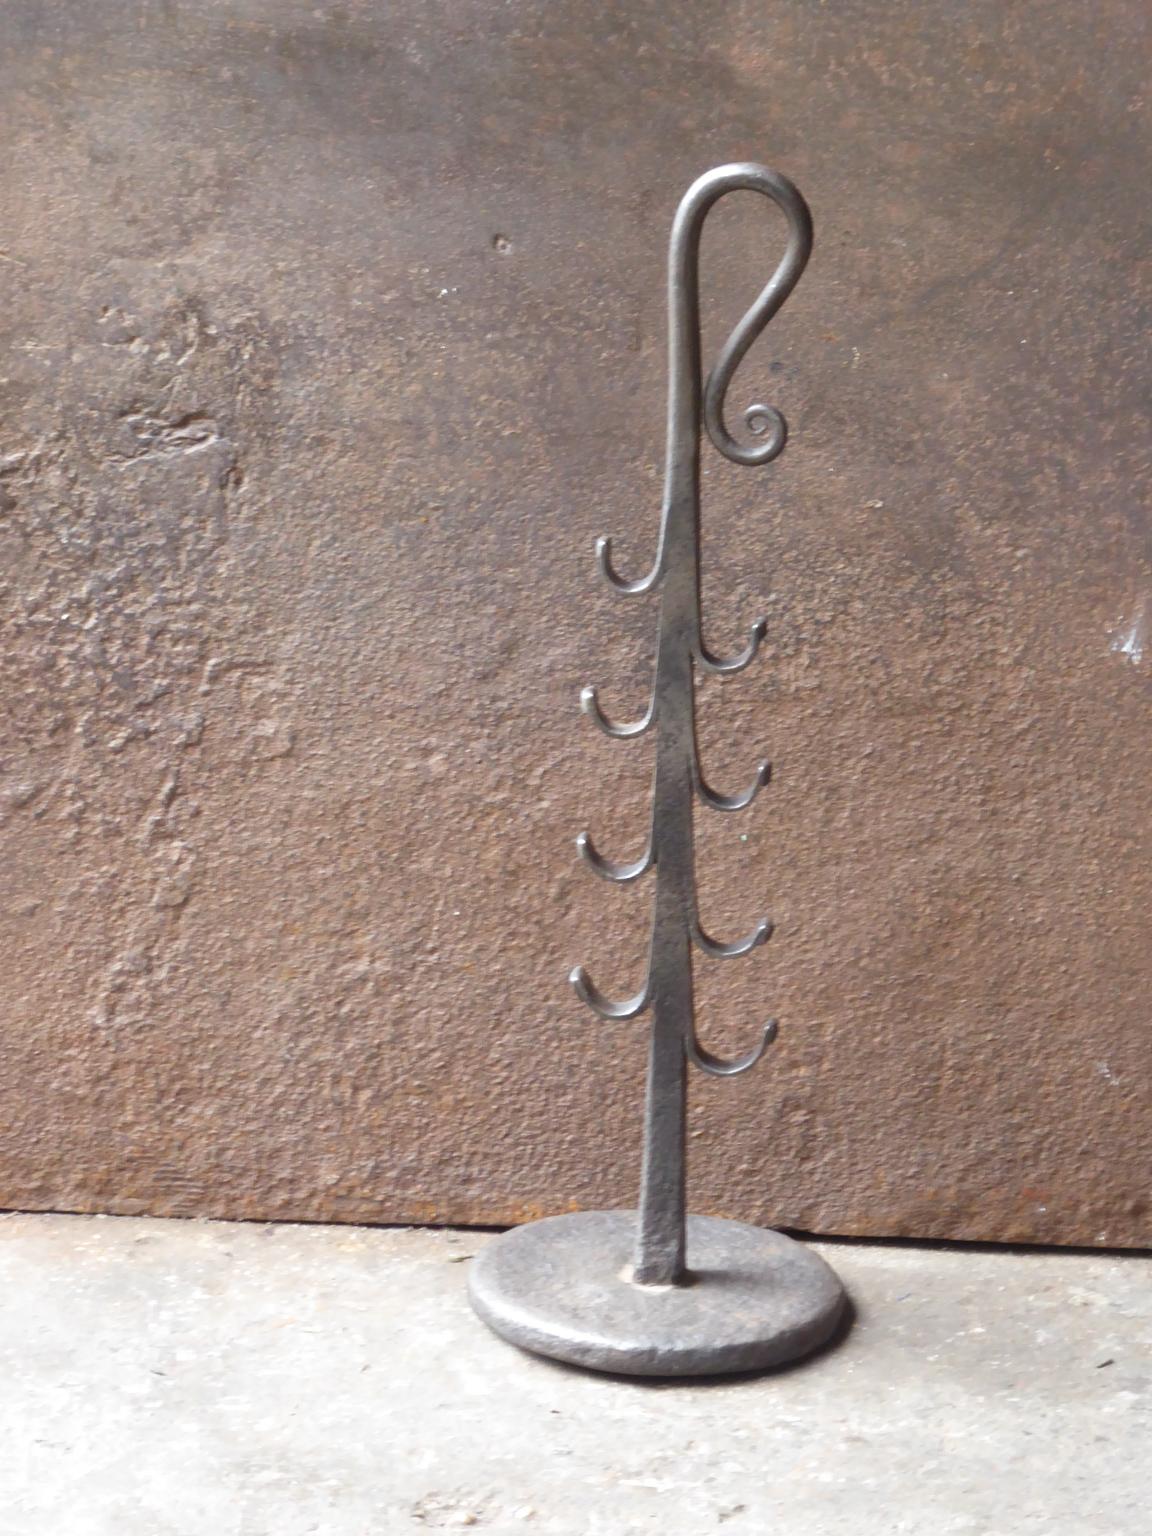 18th century French Louis XV period stand for a roasting jack. The stand is hand forged and made of wrought iron with a cast iron base. The condition is good.







 